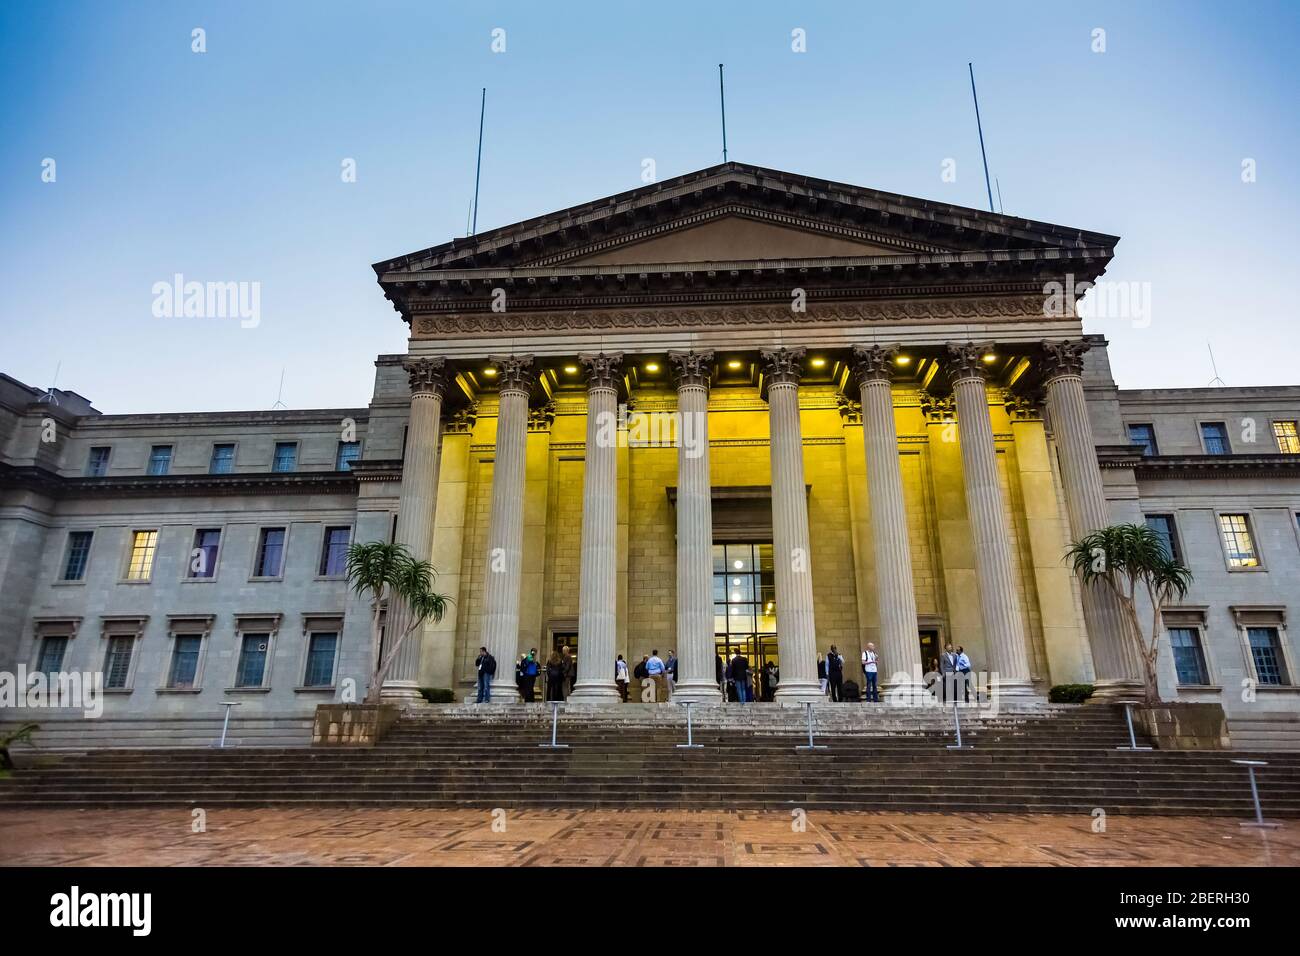 Johannesburg, South Africa - November 24, 2014: Exterior view of the Great Hall at the University of the Witwatersrand in Johannesburg South Africa Stock Photo